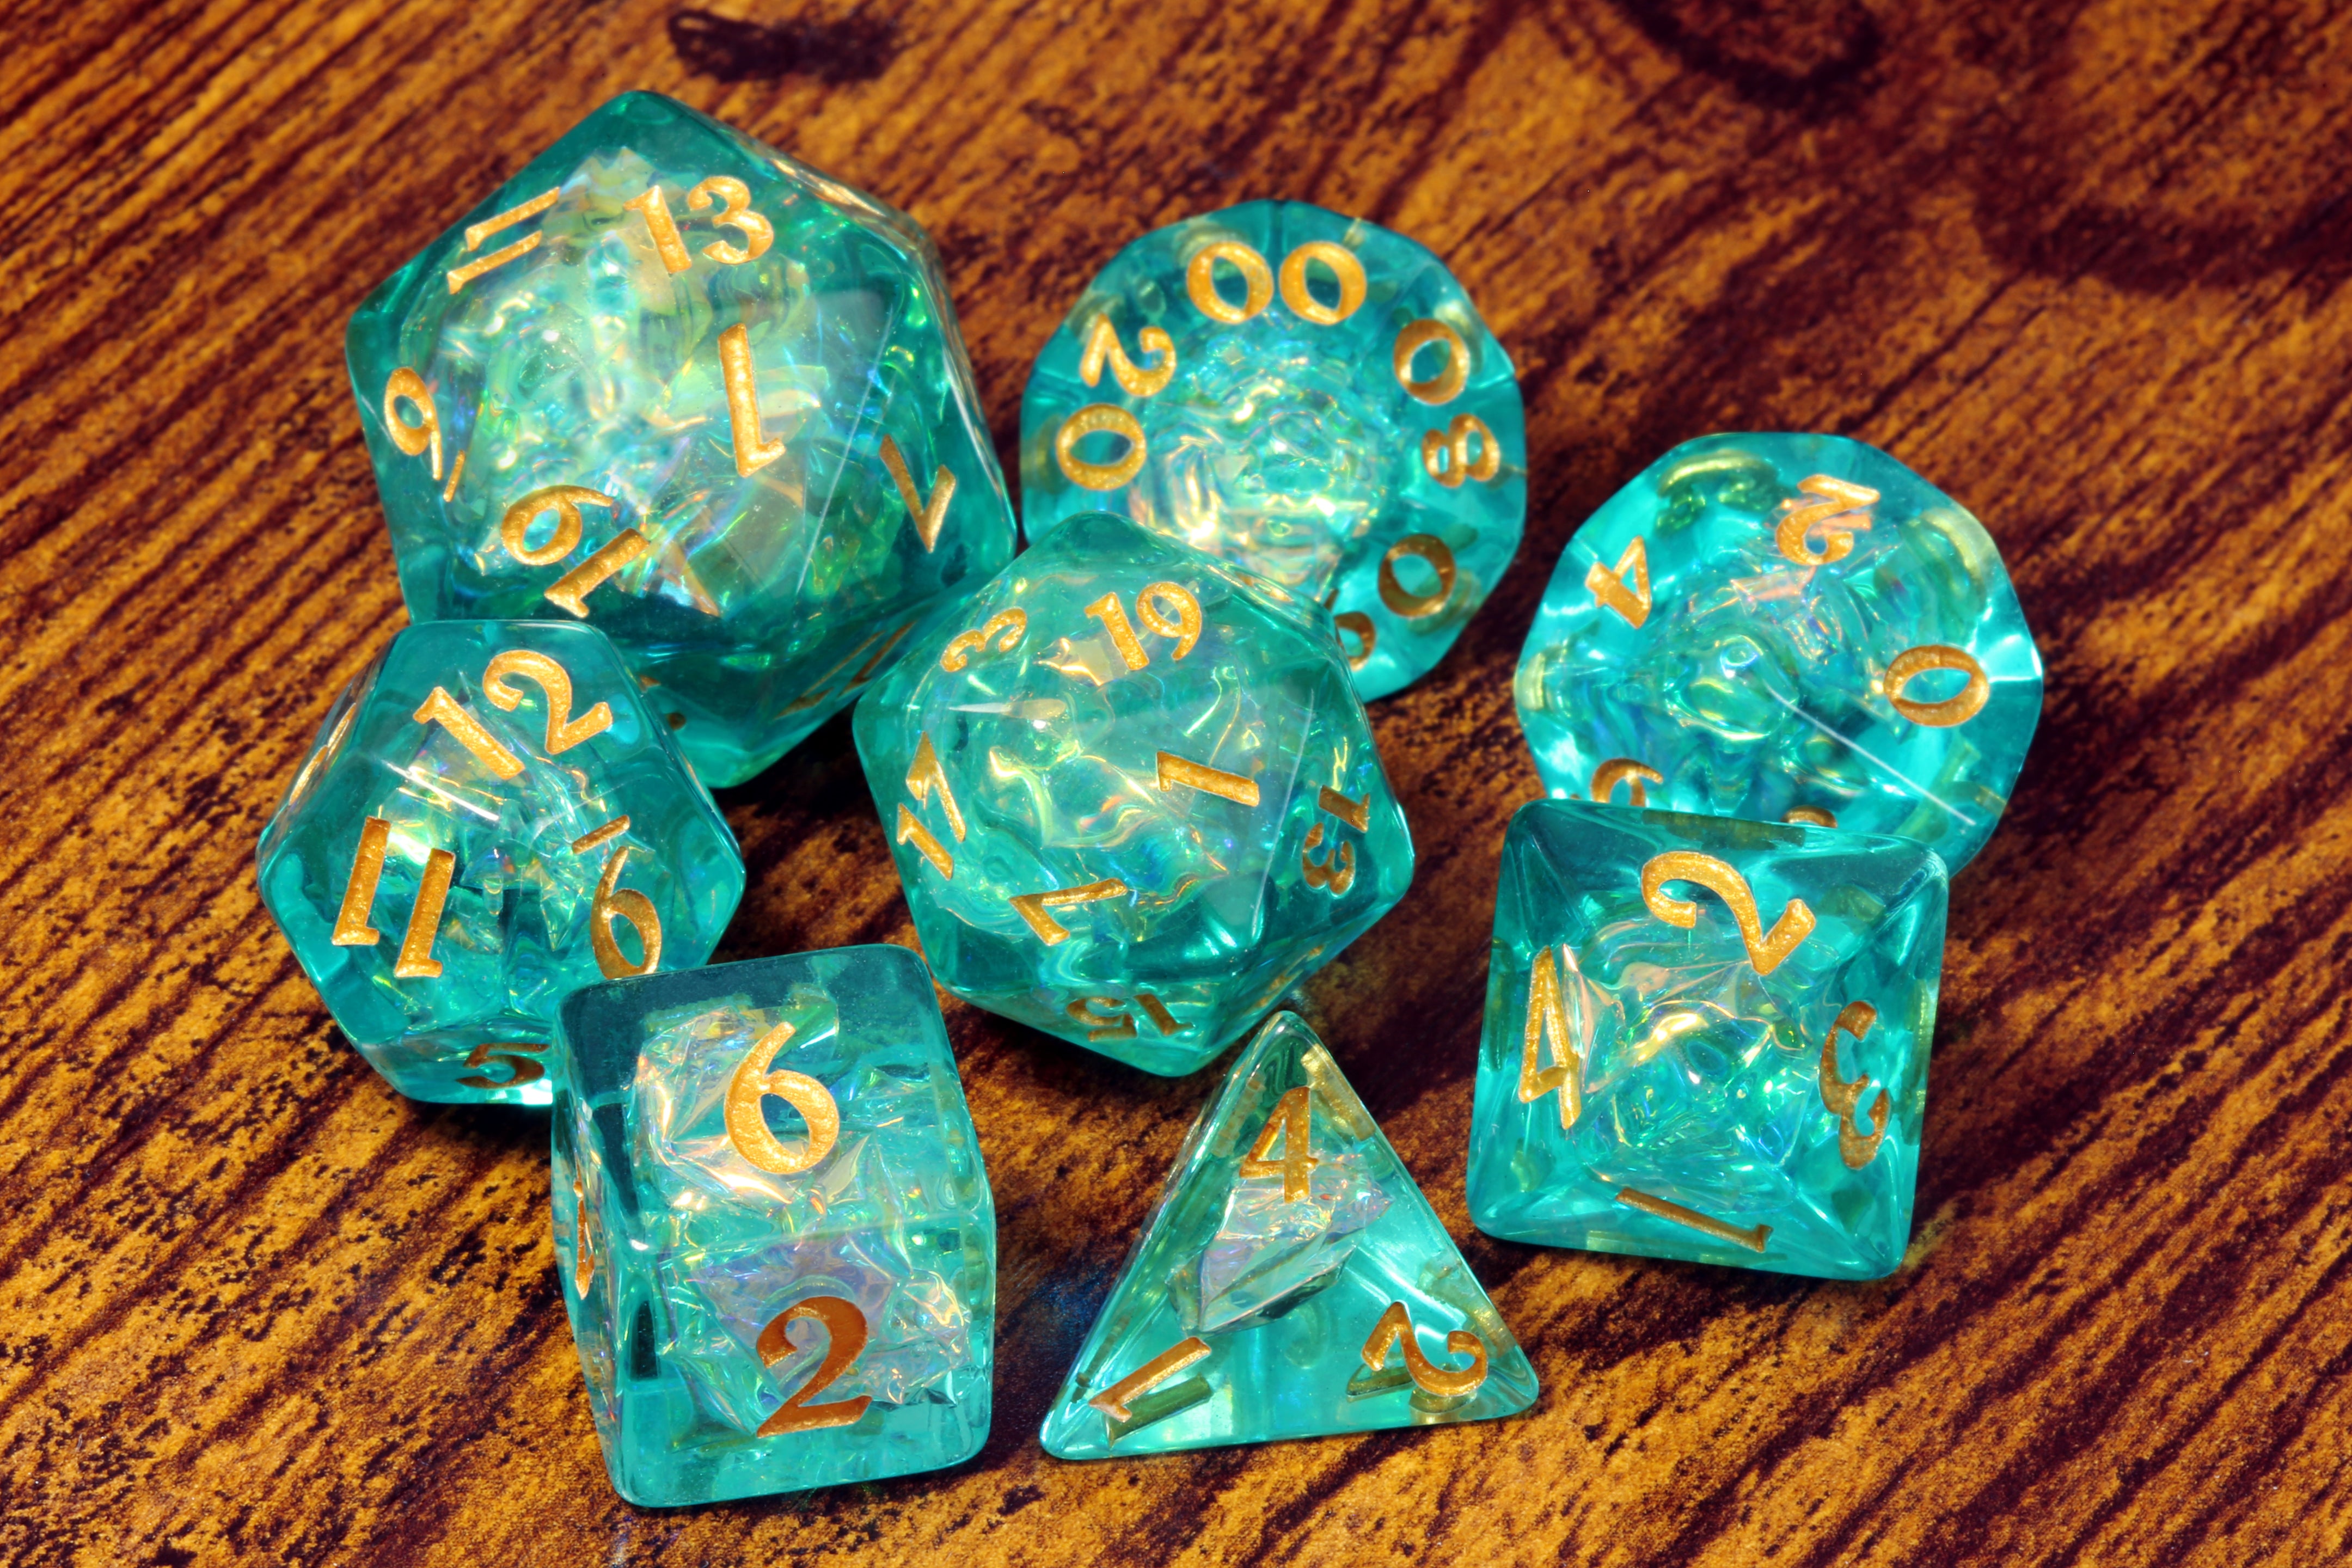 Ocean Opal 8 piece dice set - Green with Holographic inclusions - The Wizard's Vault